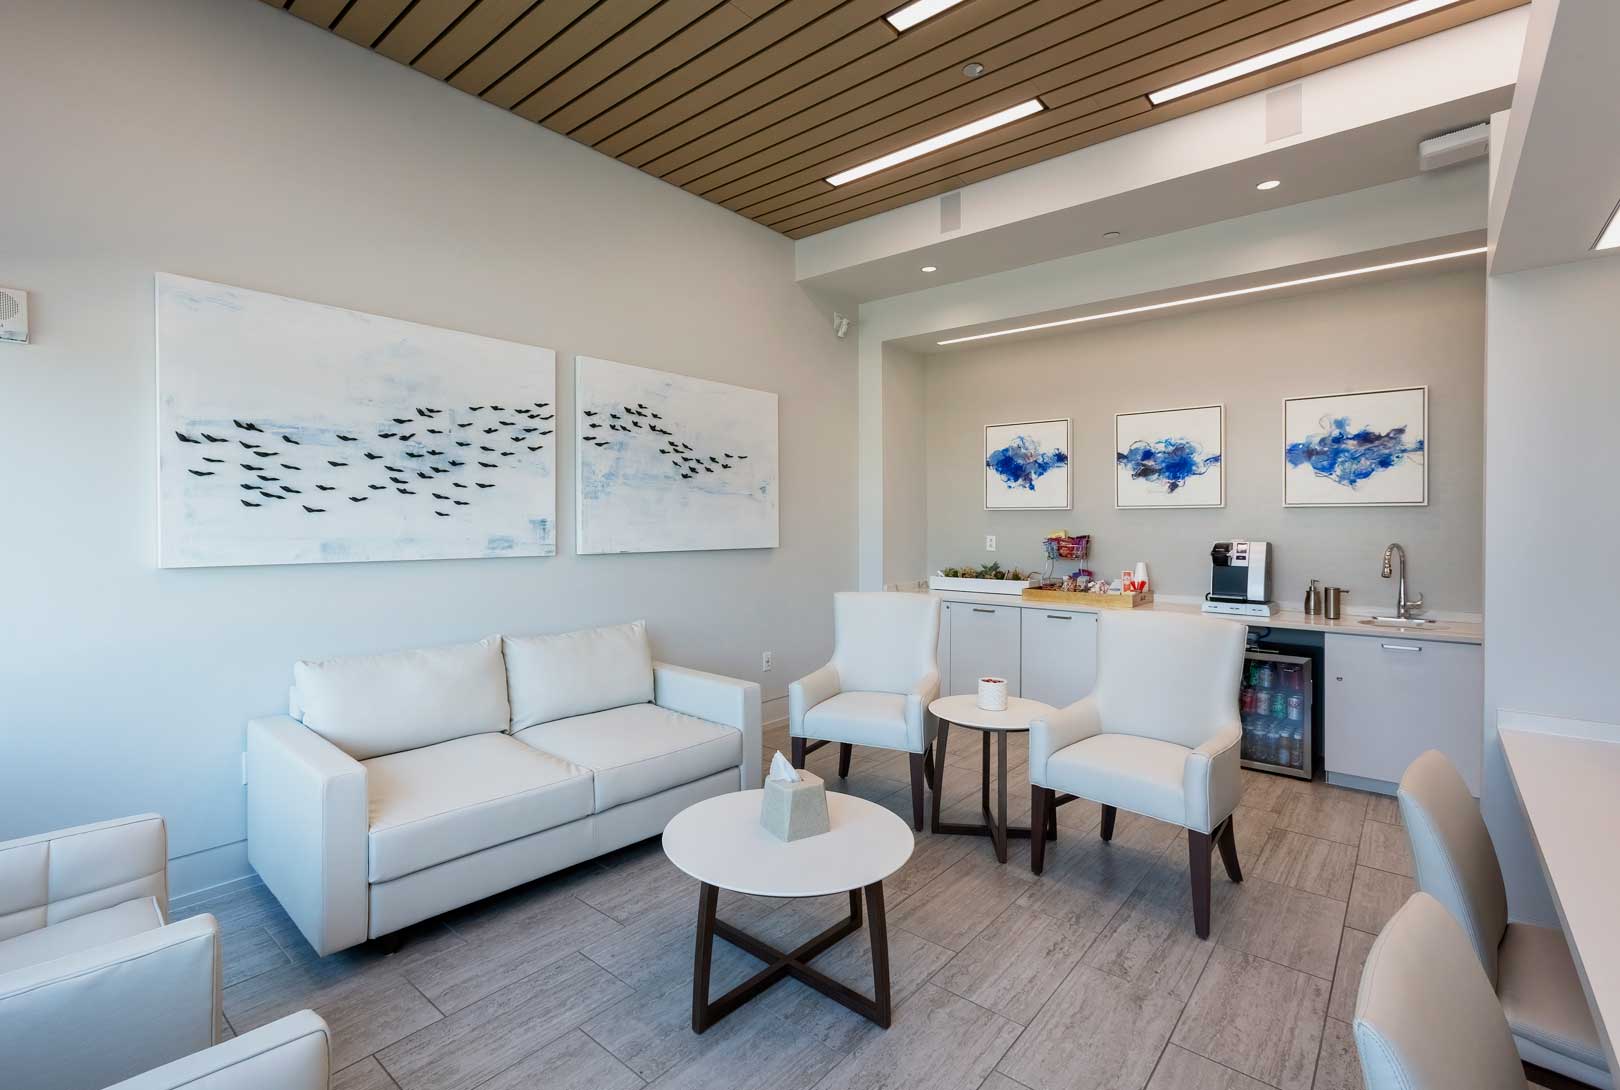 Vanderbilt Executive Wellness Clinic with all-white modern furniture and design elements